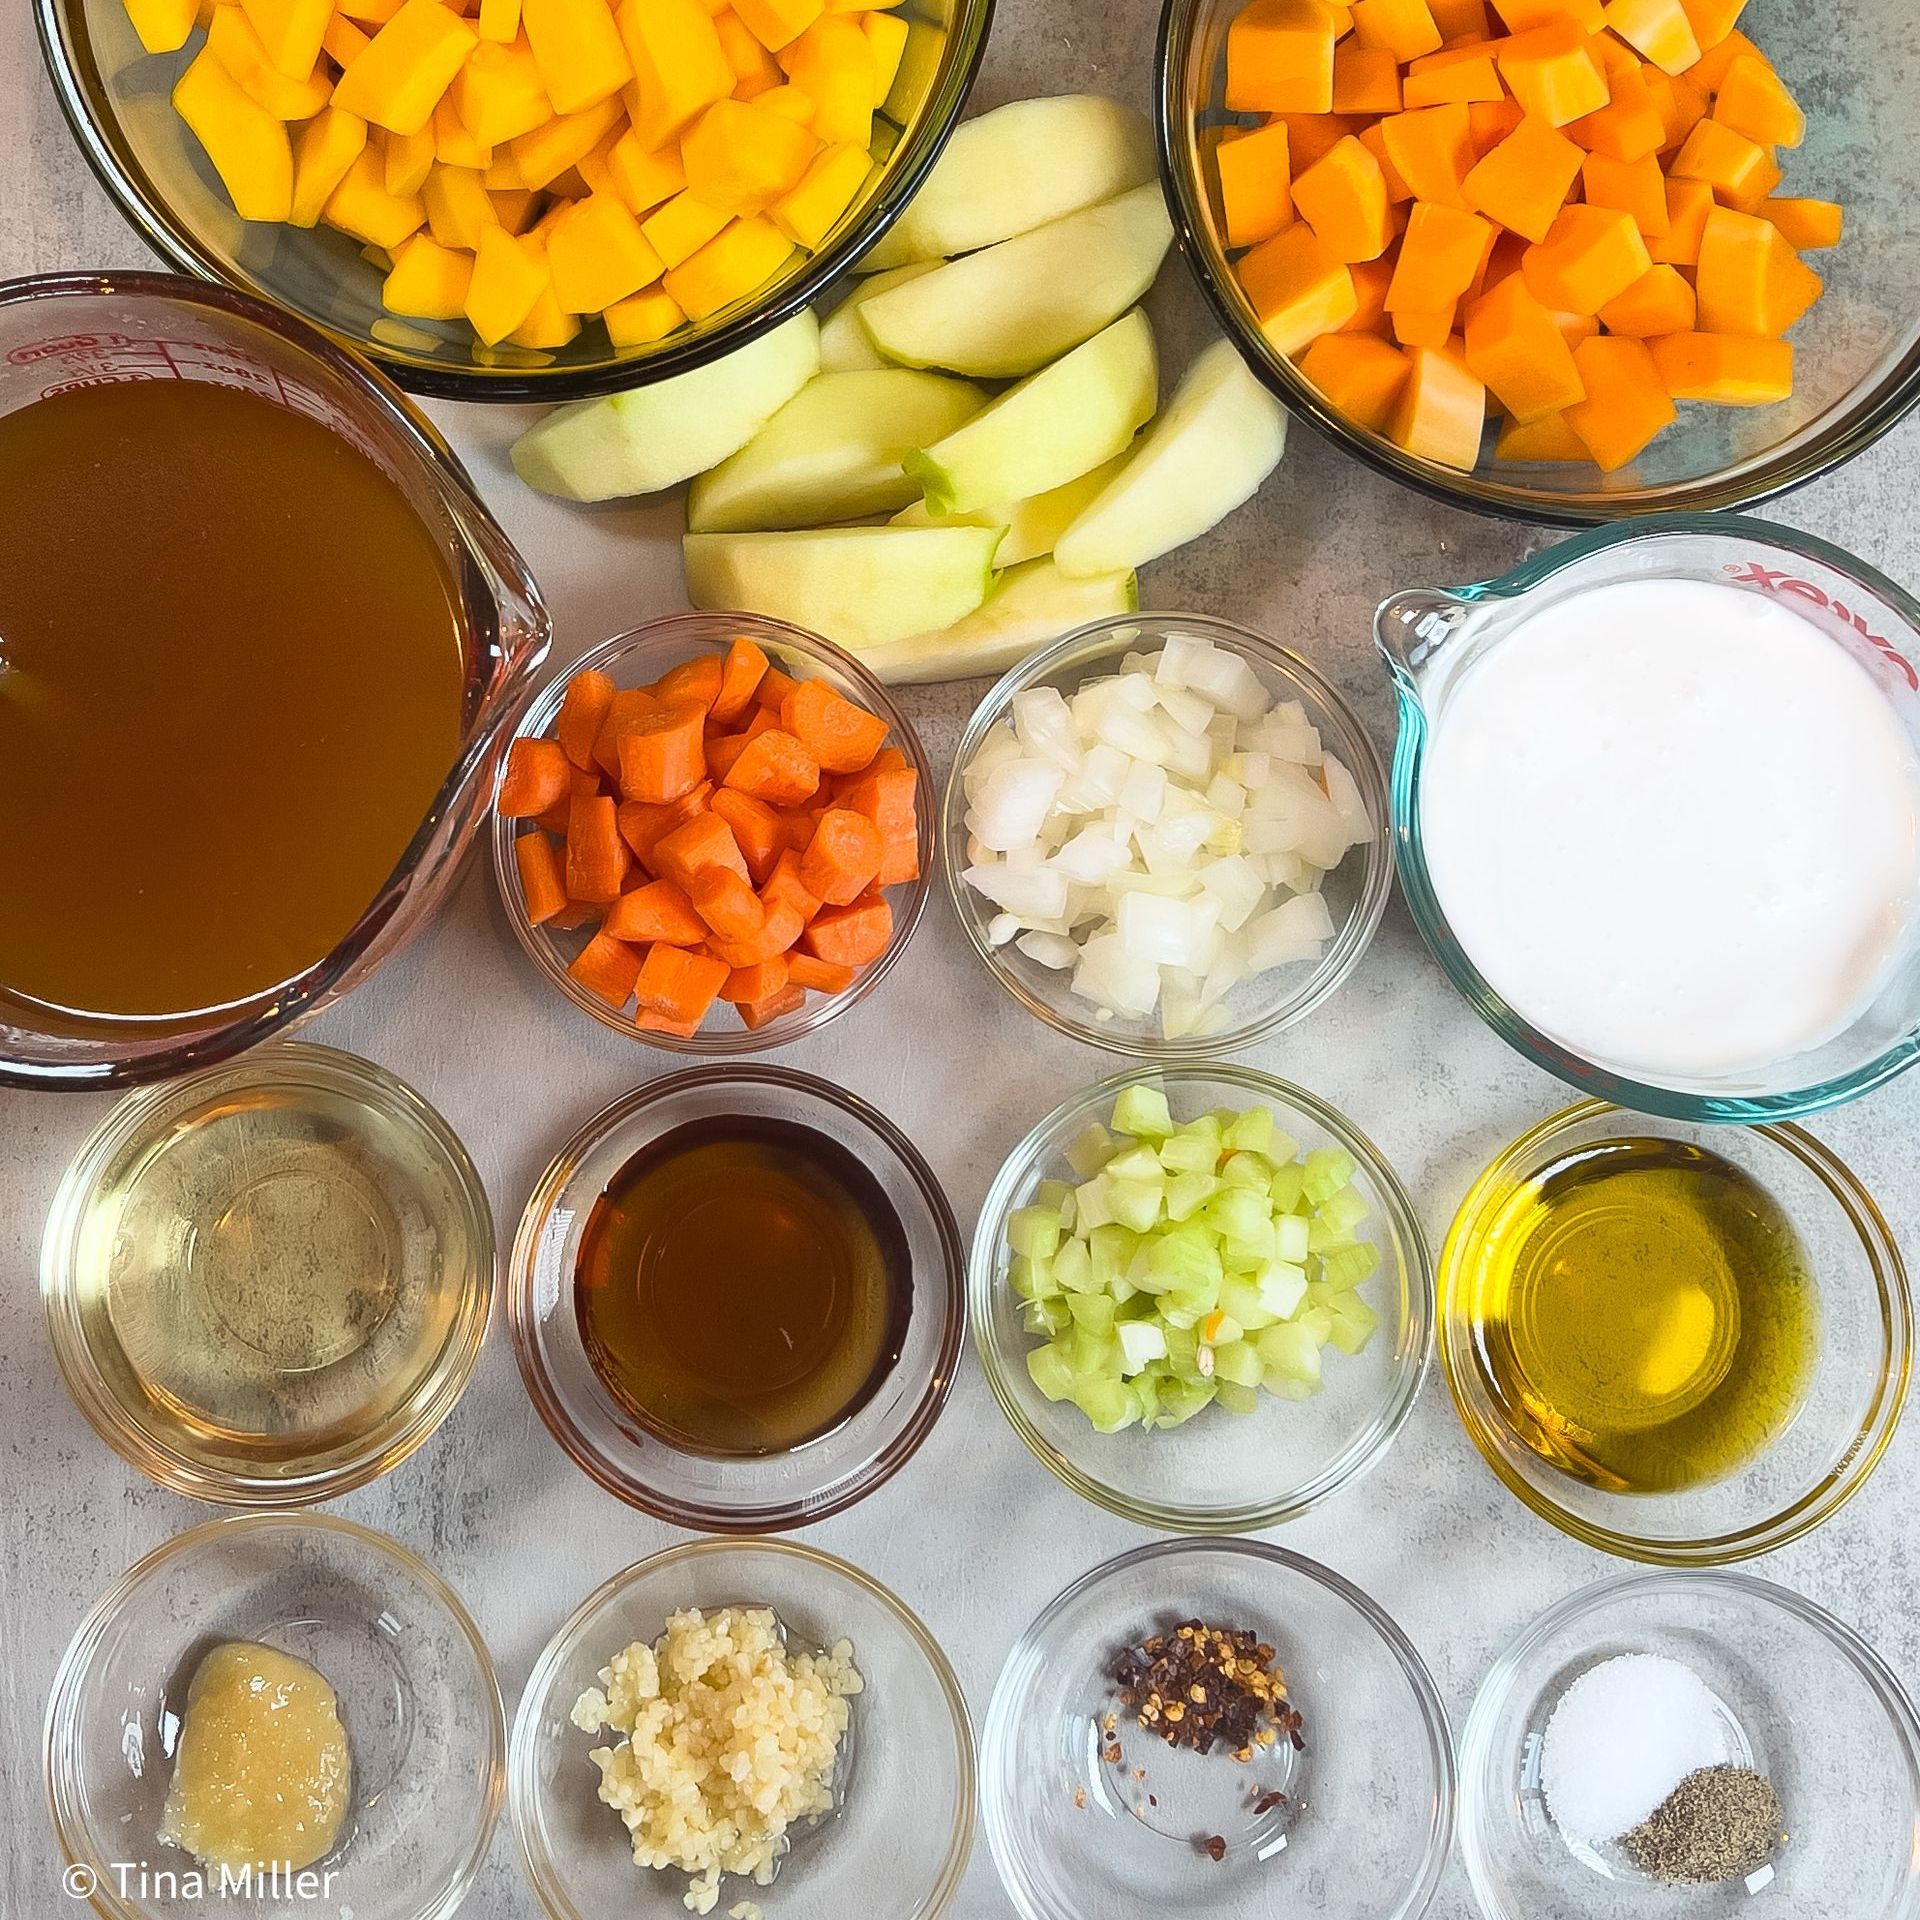 Ingredients for Roasted butternut squash bisque in glass bowls including candy squash, granny smith apples, butternut squash, vegetable broth, carrots, onion, coconut milk, white wine, agave sweetener, celery, olive oil, garlic, ginger, red pepper flakes, salt and pepper.